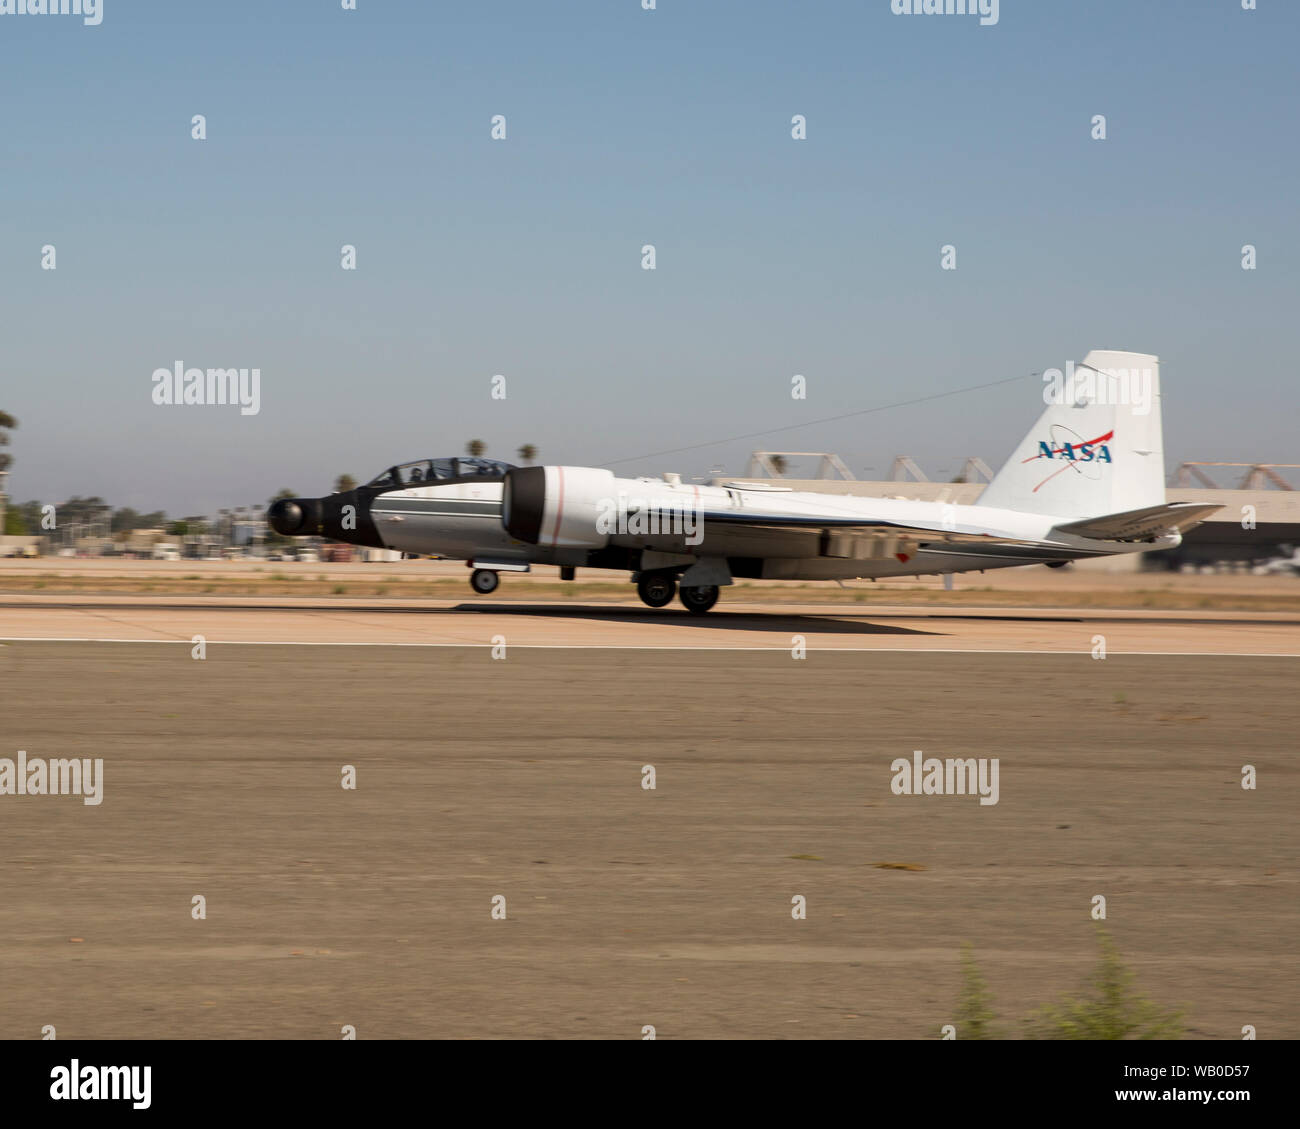 A NASA WB-47 takes off from the flight line of Marine Corps Air Station Miramar, Calif., Aug. 21. The aircraft was utilizing the MCAS Miramar flight line and airspace to test new communications software. (U.S. Marine Corps photo by Lance Cpl. Jose GuerreroDeleon) Stock Photo